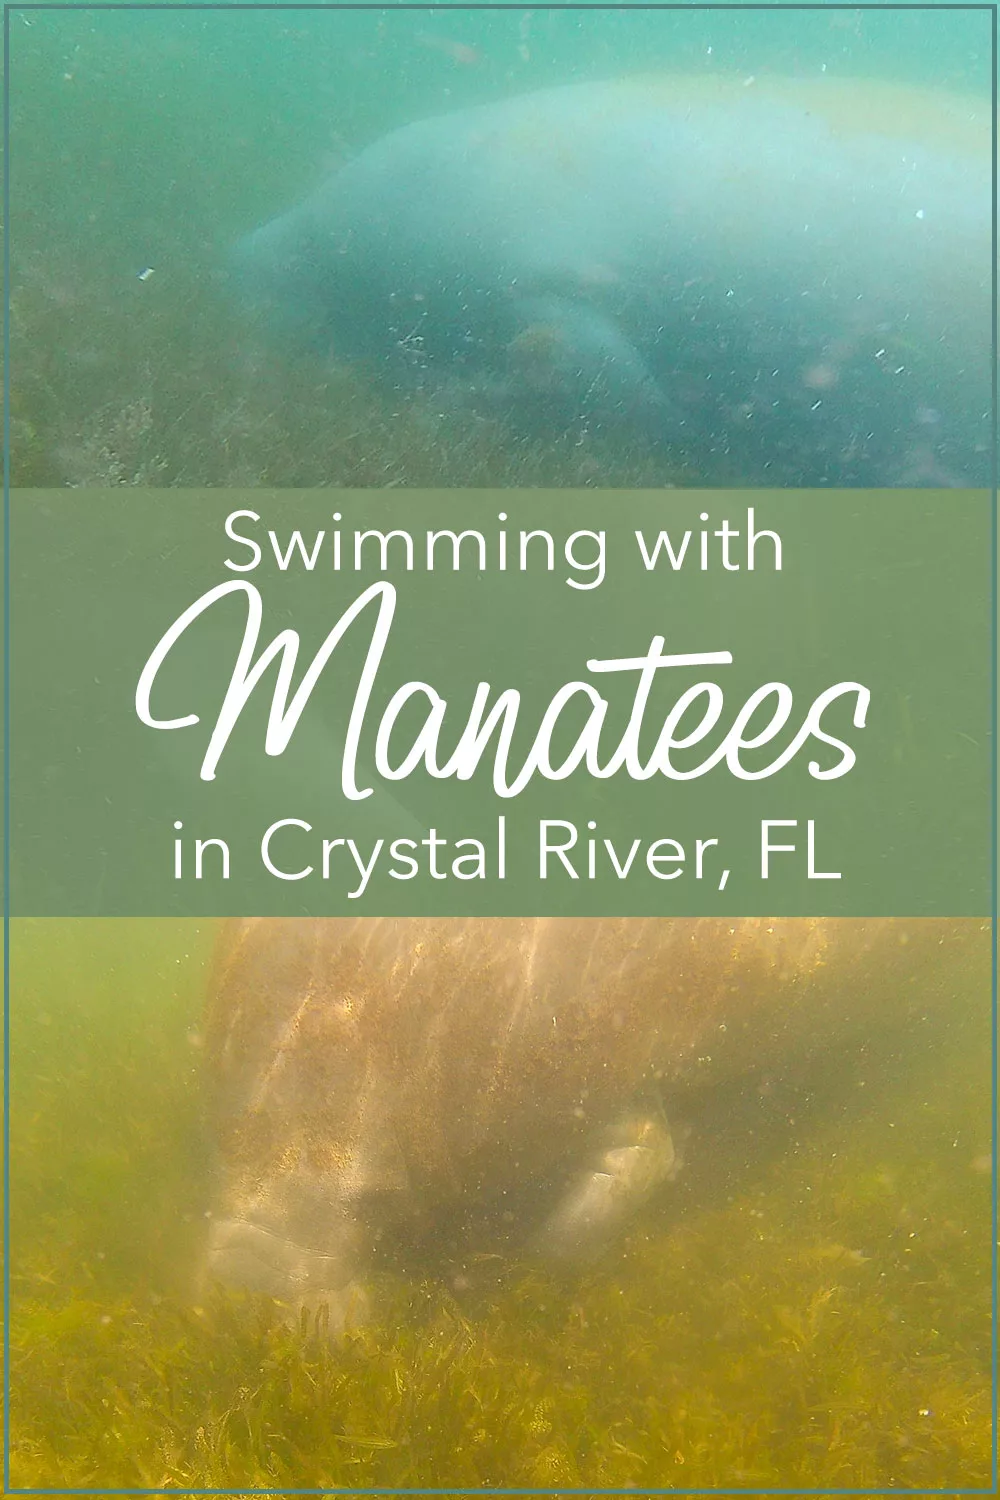 Swimming with Manatees in Crystal River